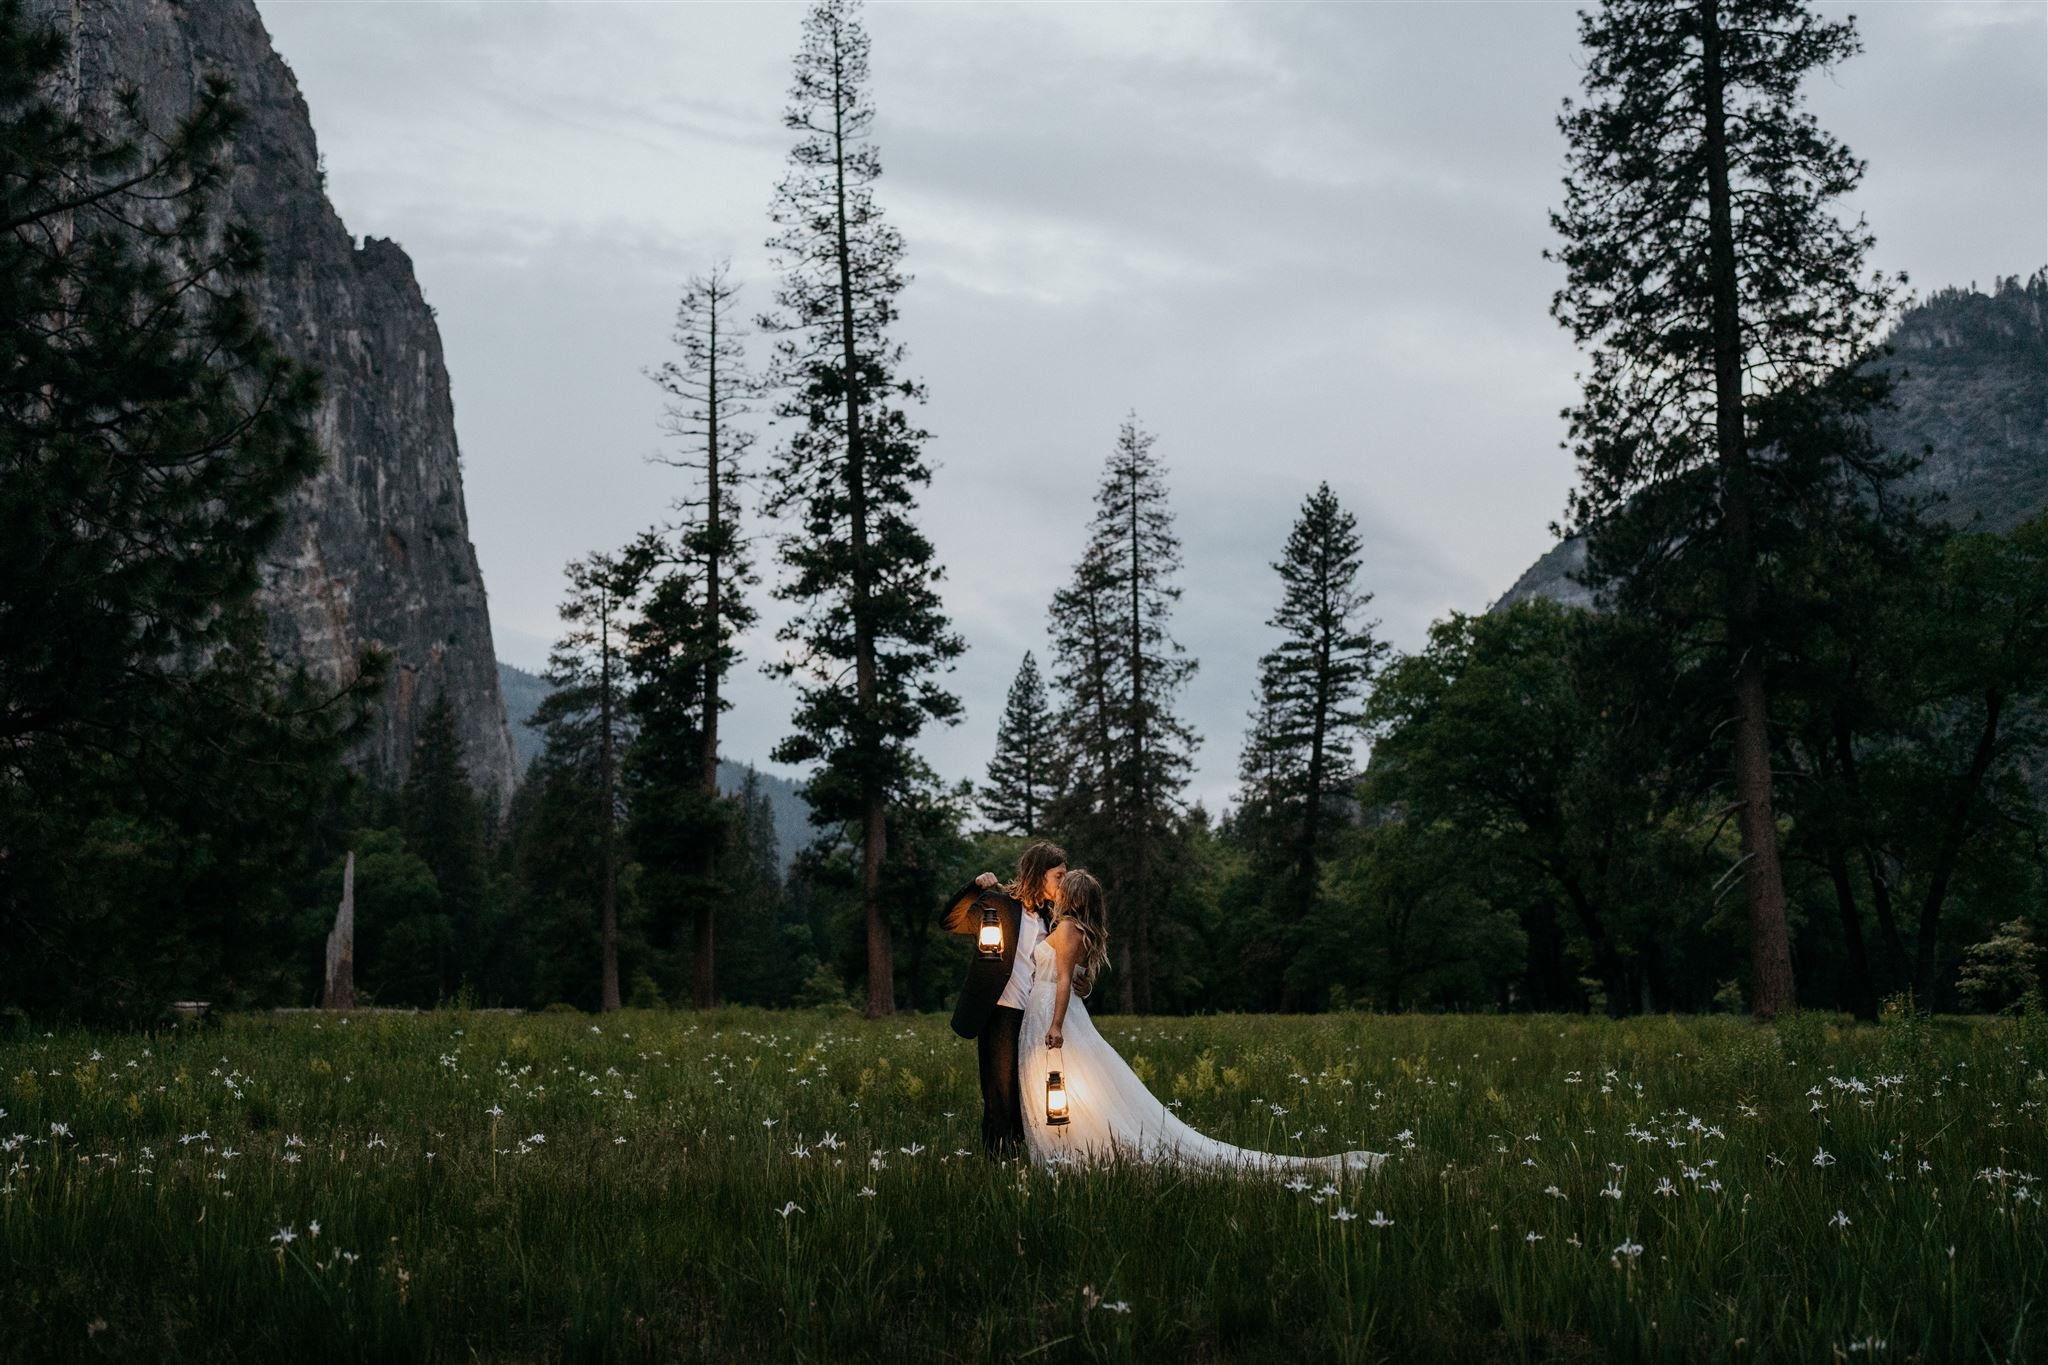 Bride and groom carrying lanterns through El Capitan meadow during their Yosemite elopement